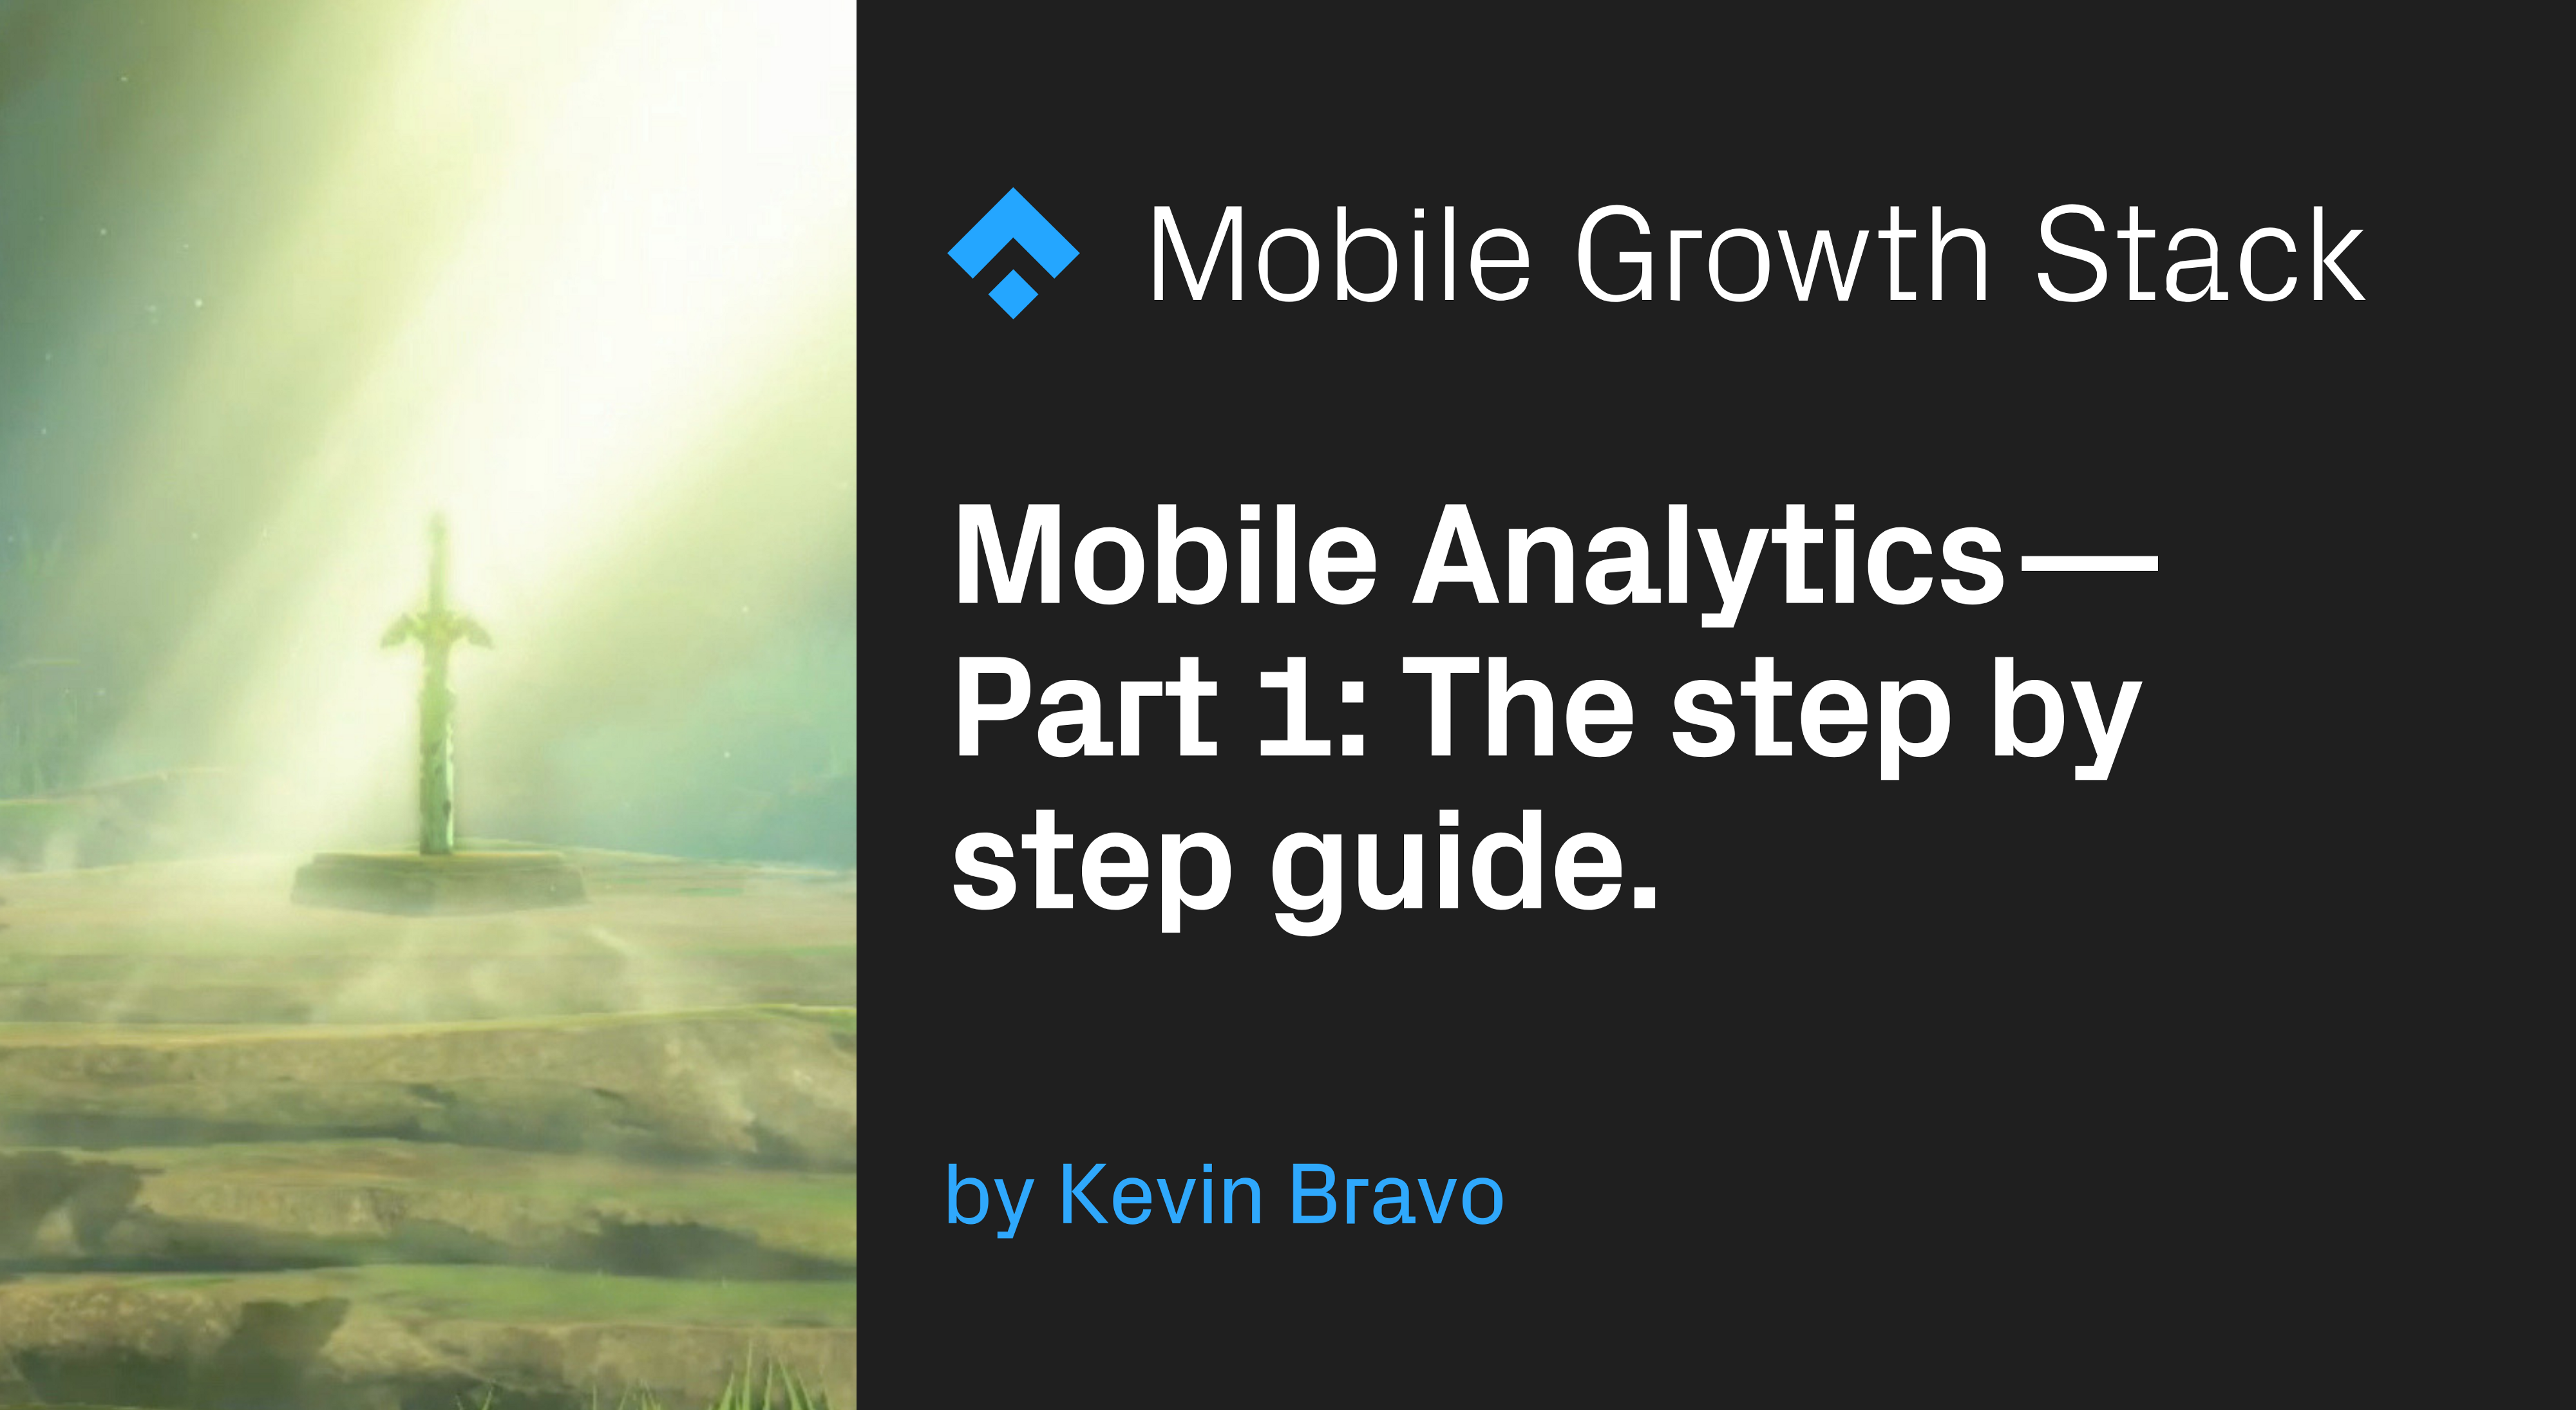 Mobile Analytics — Part 1: The step by step guide.